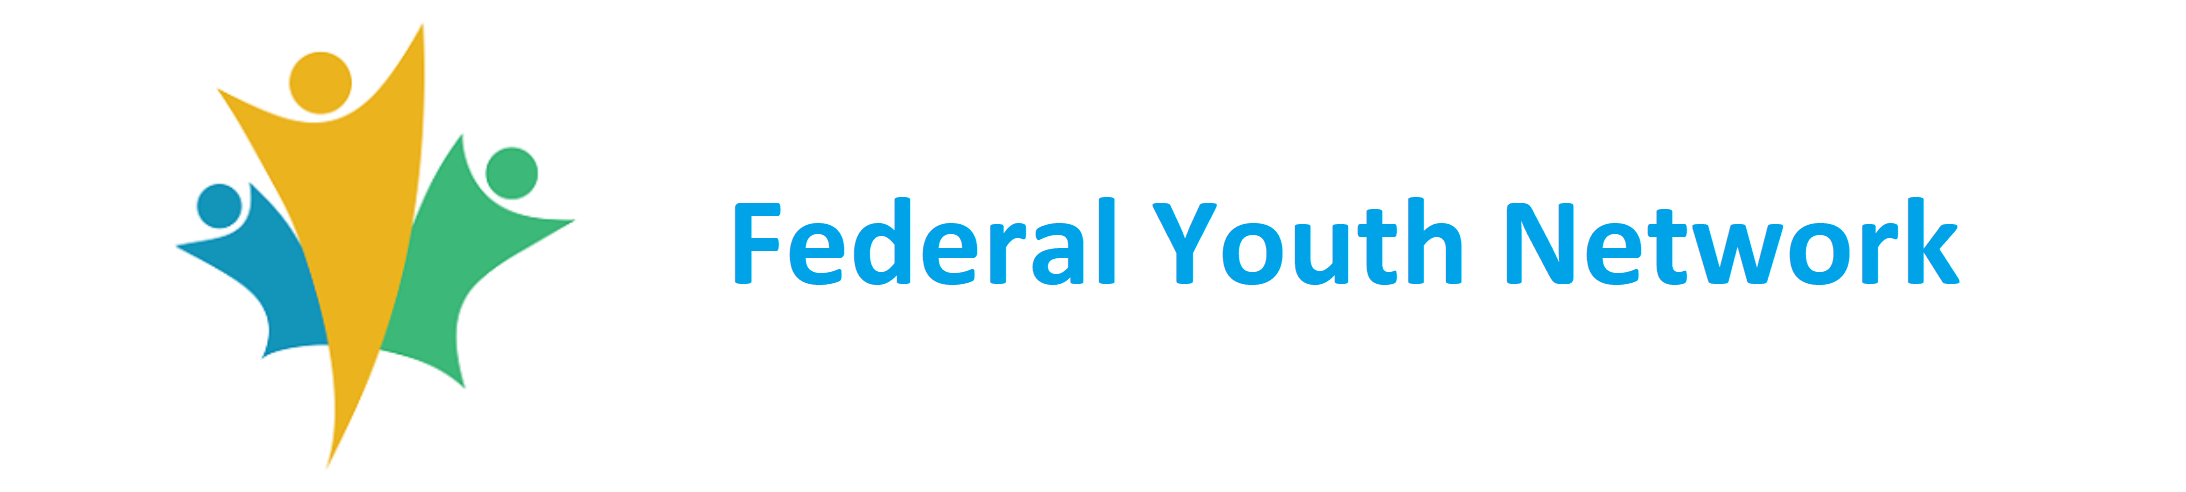 https://wiki.gccollab.ca/Federal_Youth_Network/Home